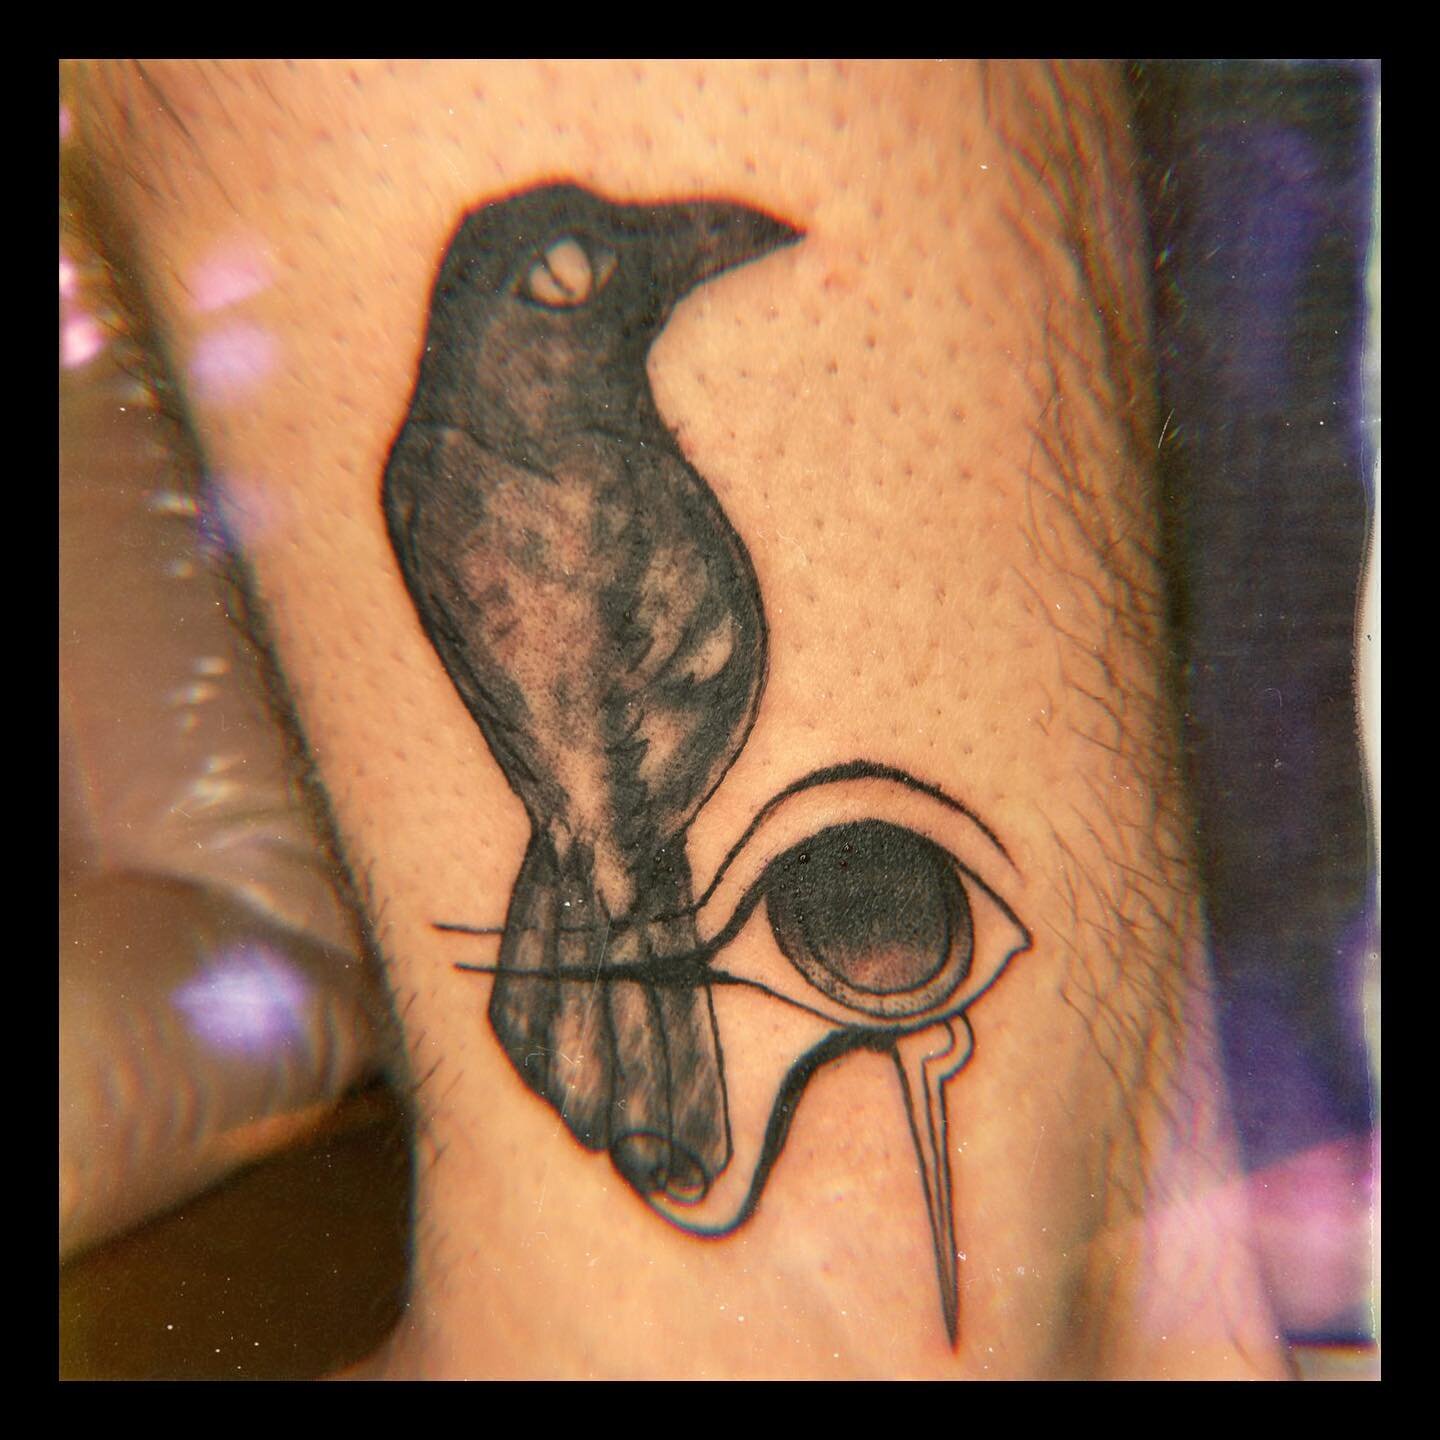 Crows with mal de ojo done @misfitkavabar 
👁🖤🕊